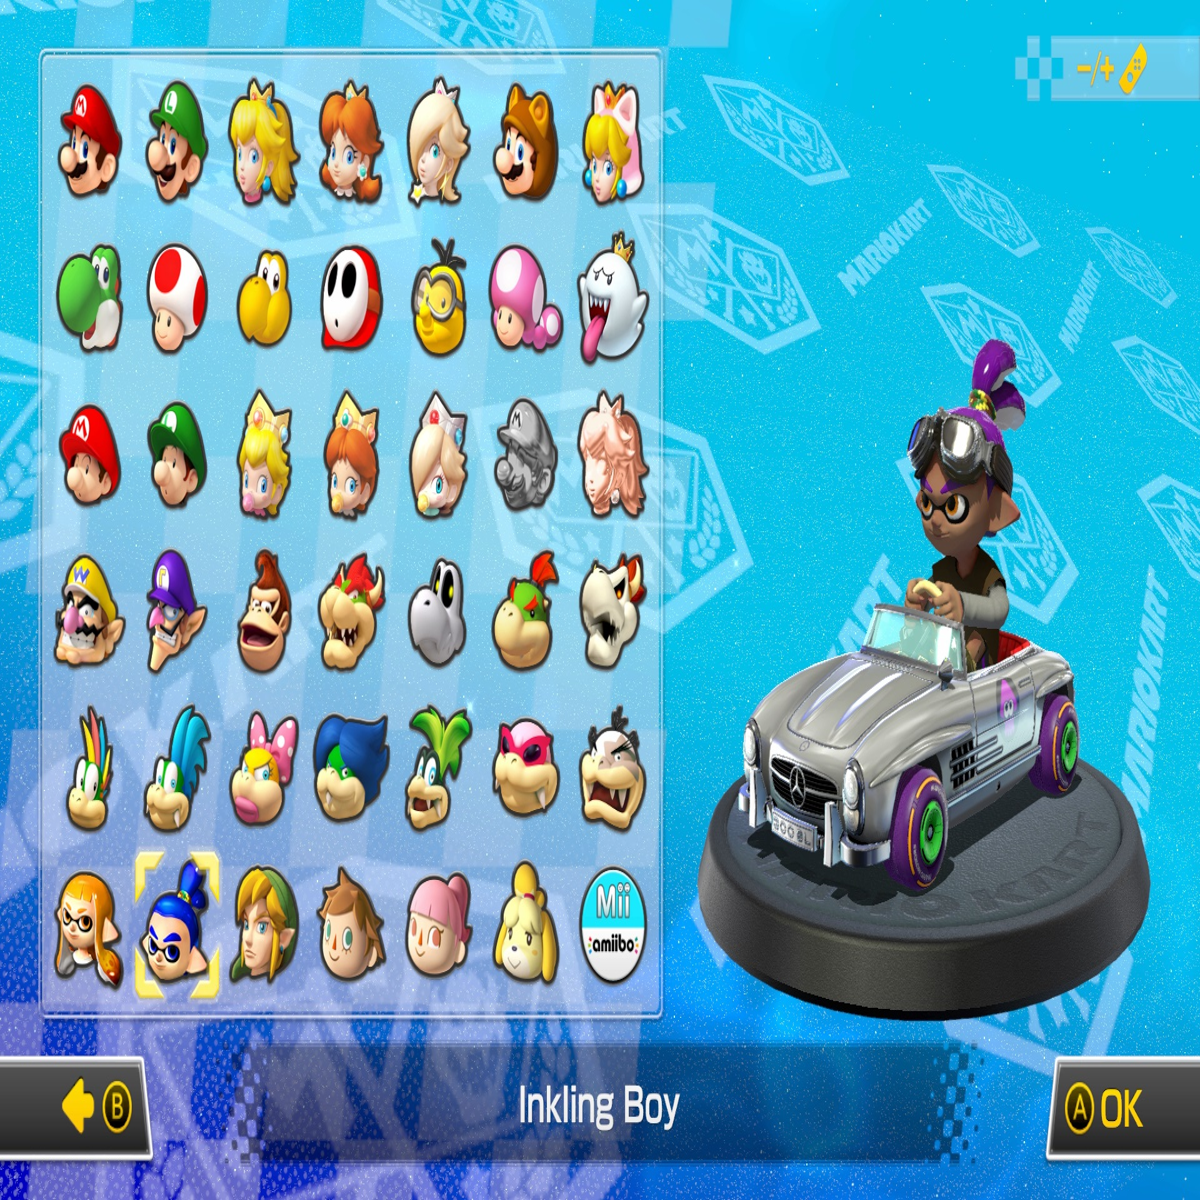 Best Mario Kart 8 set-up, Top kart-combos to dominate on the track